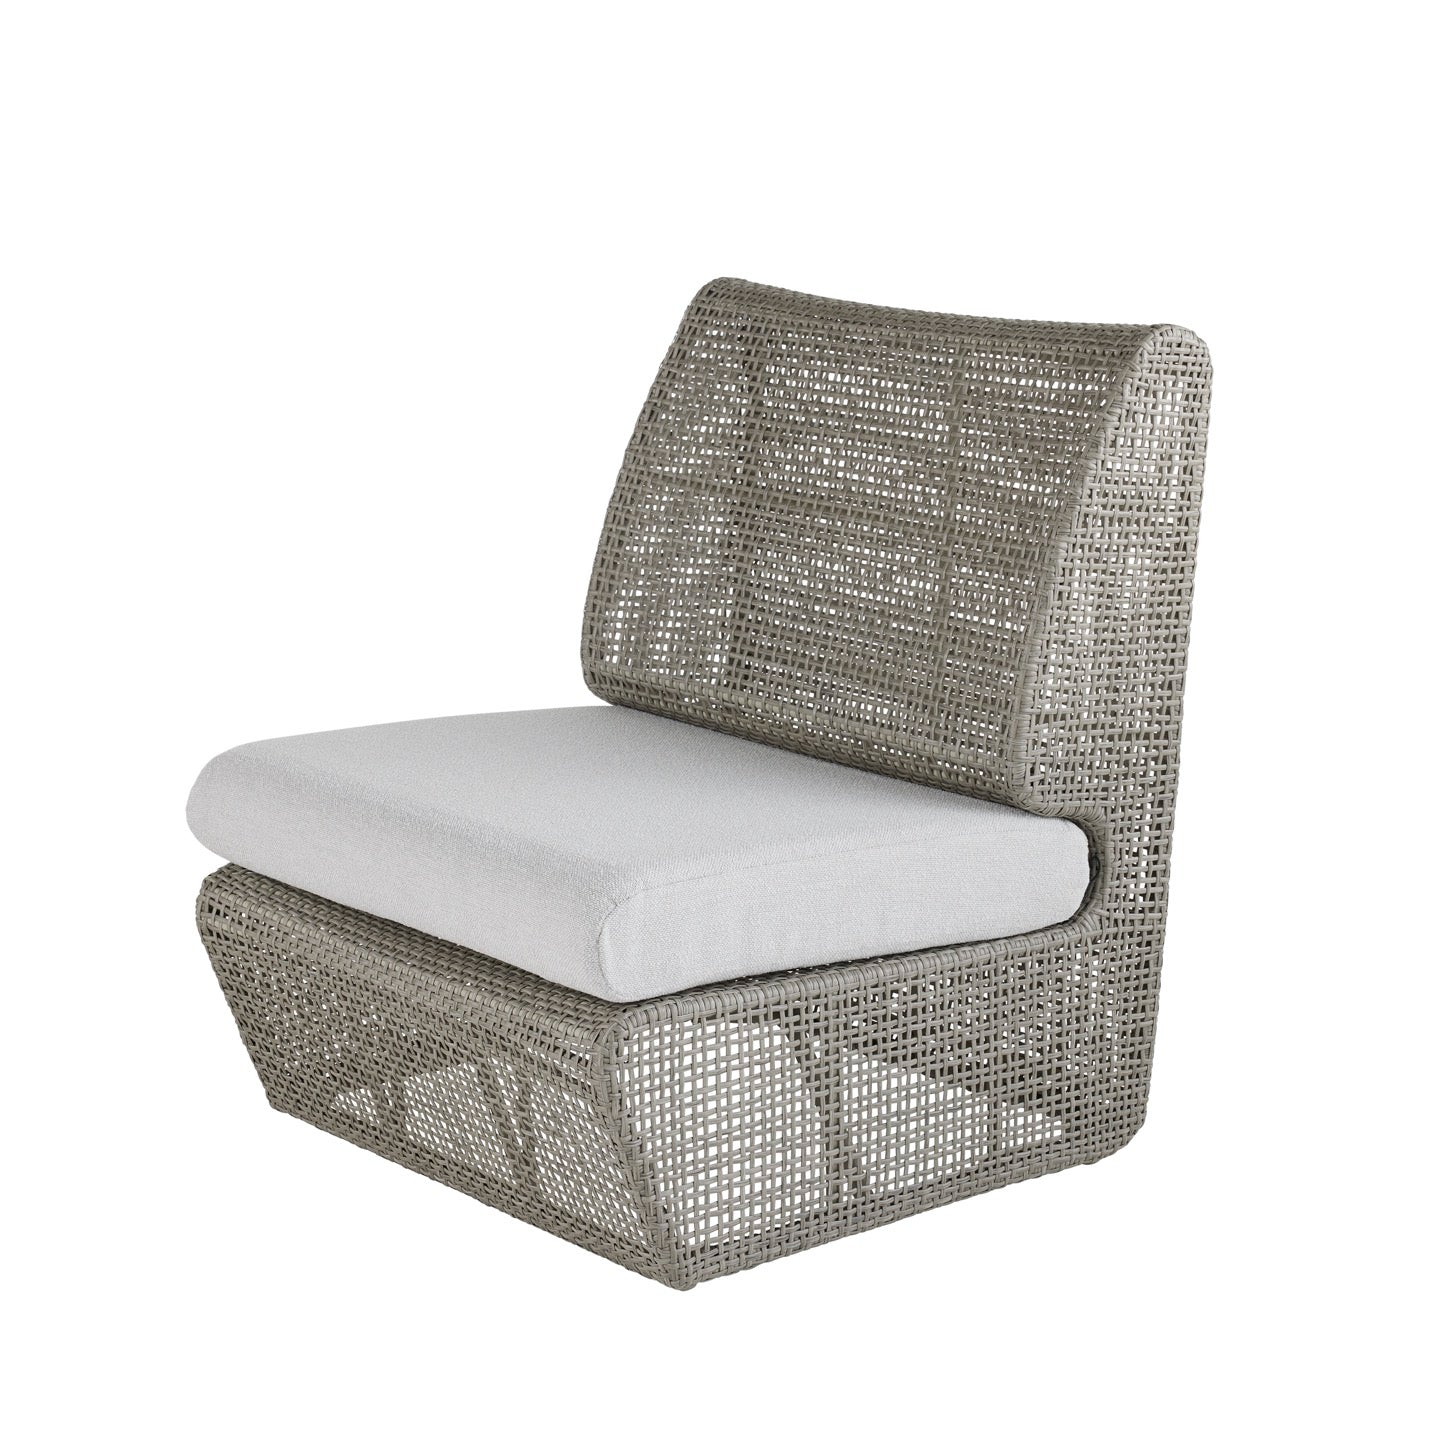 Dupont Outdoor Chair - Porpoise